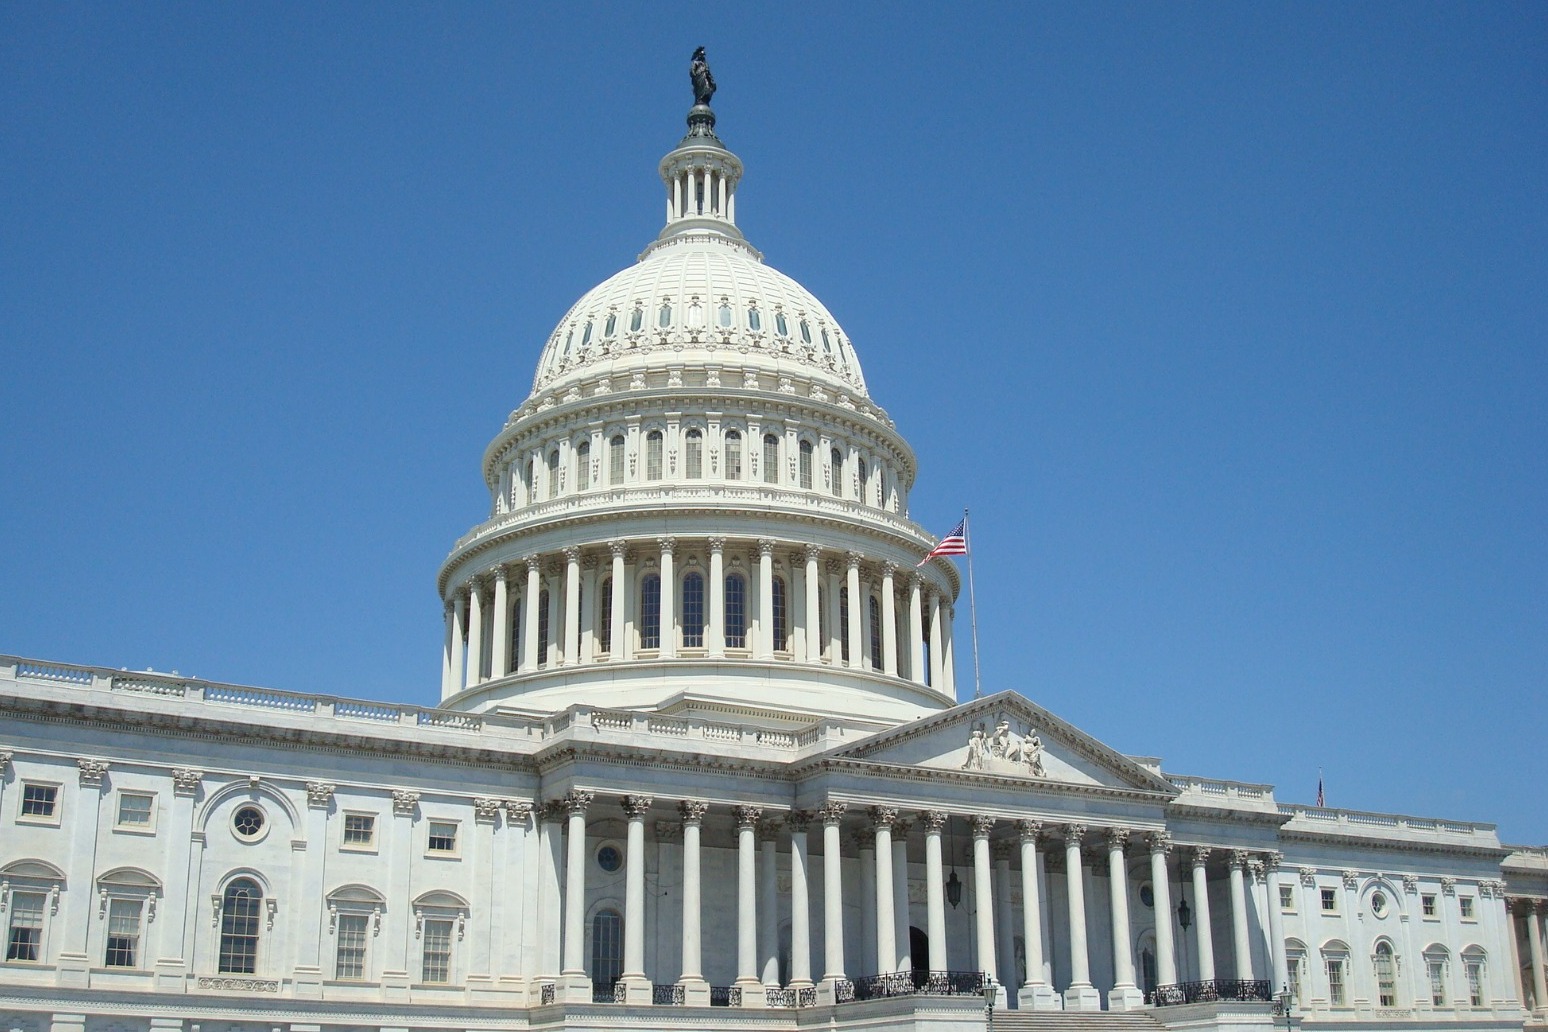 US Capitol Building on Lockdown due to \